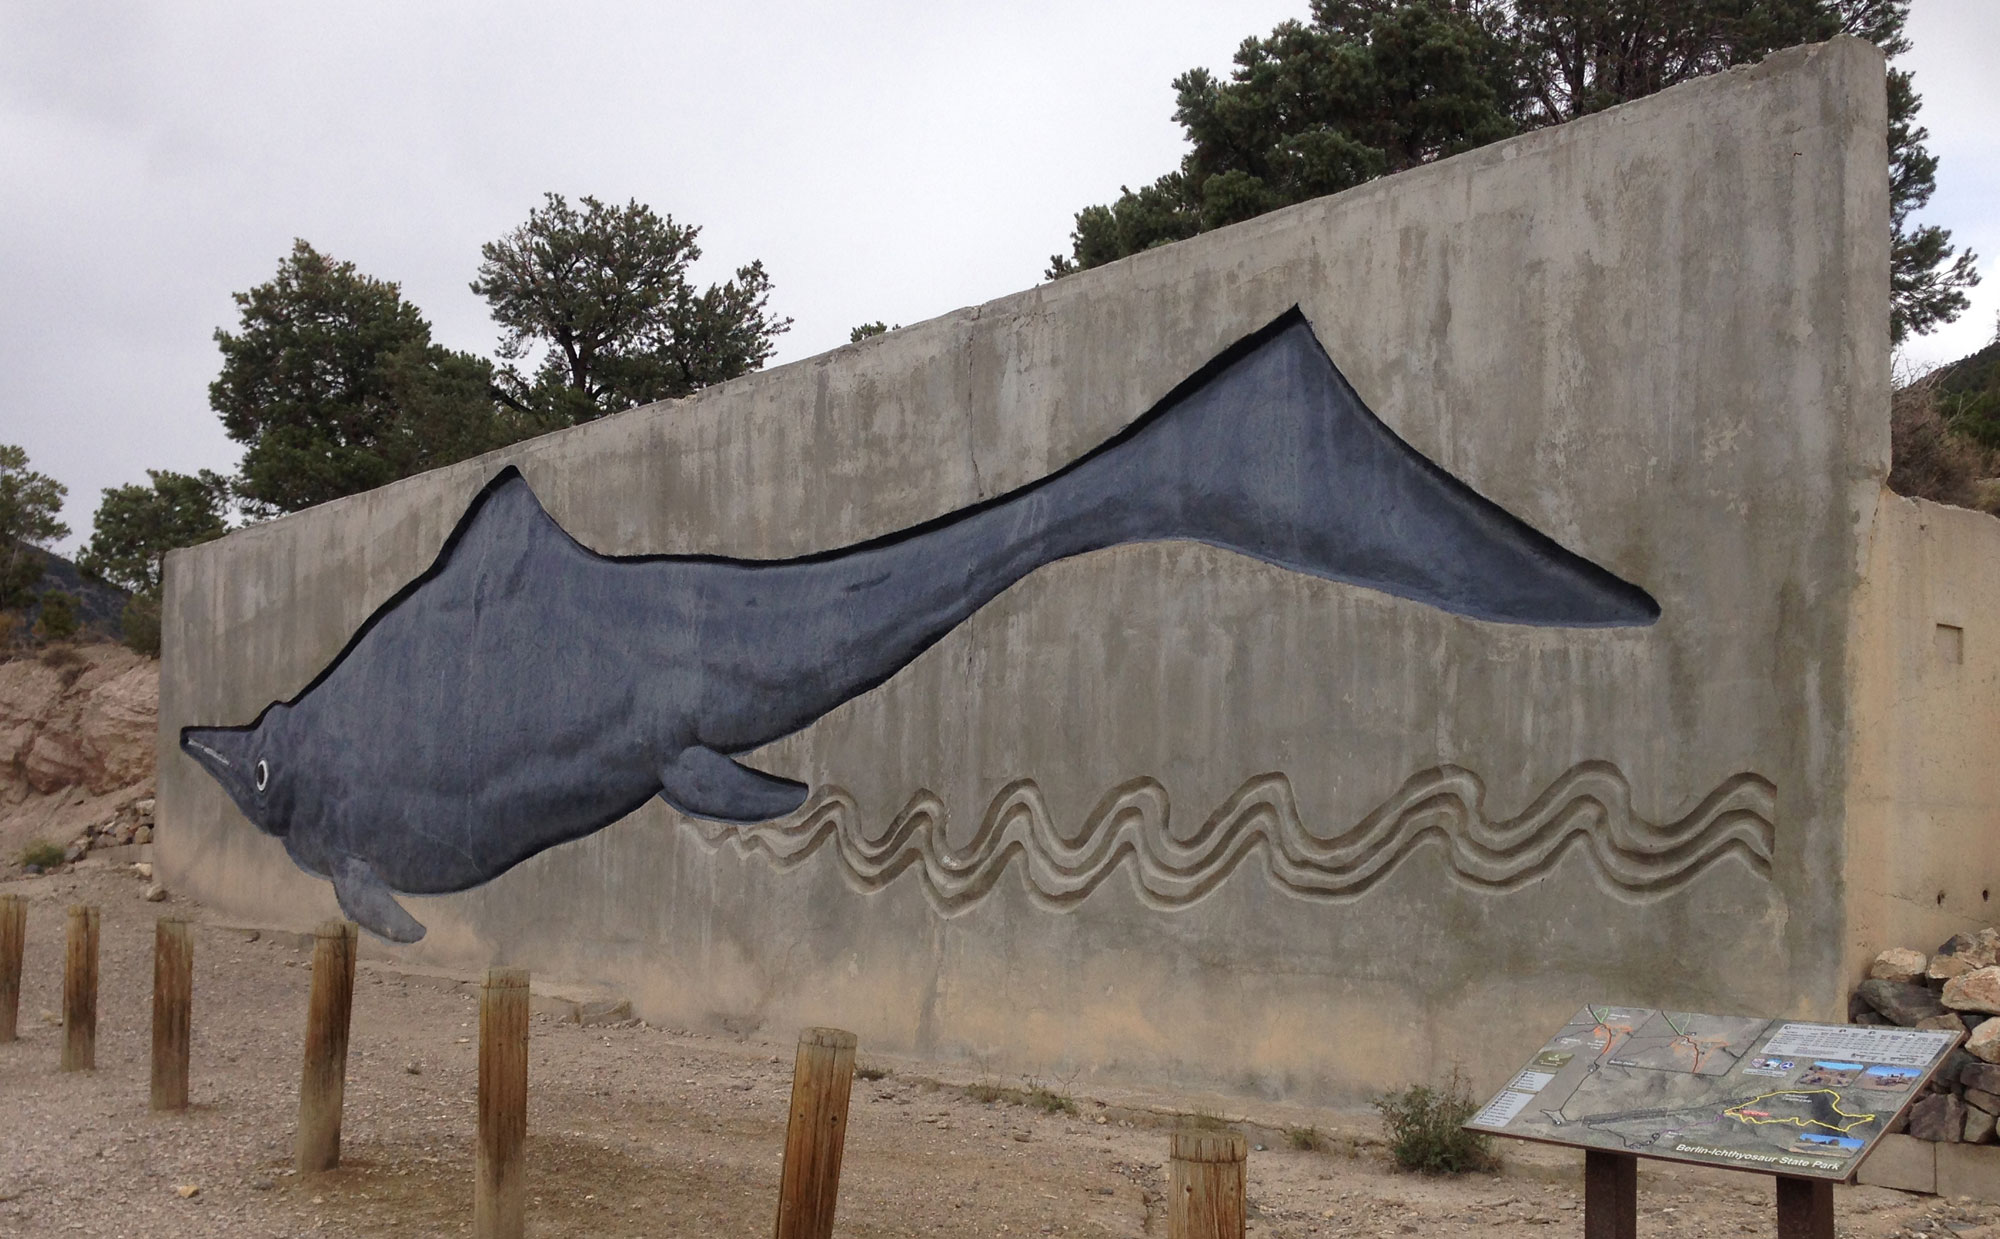 Photography of a cement wall with a large ichthyosaur in relief. The ichthyosaur is painted gray.